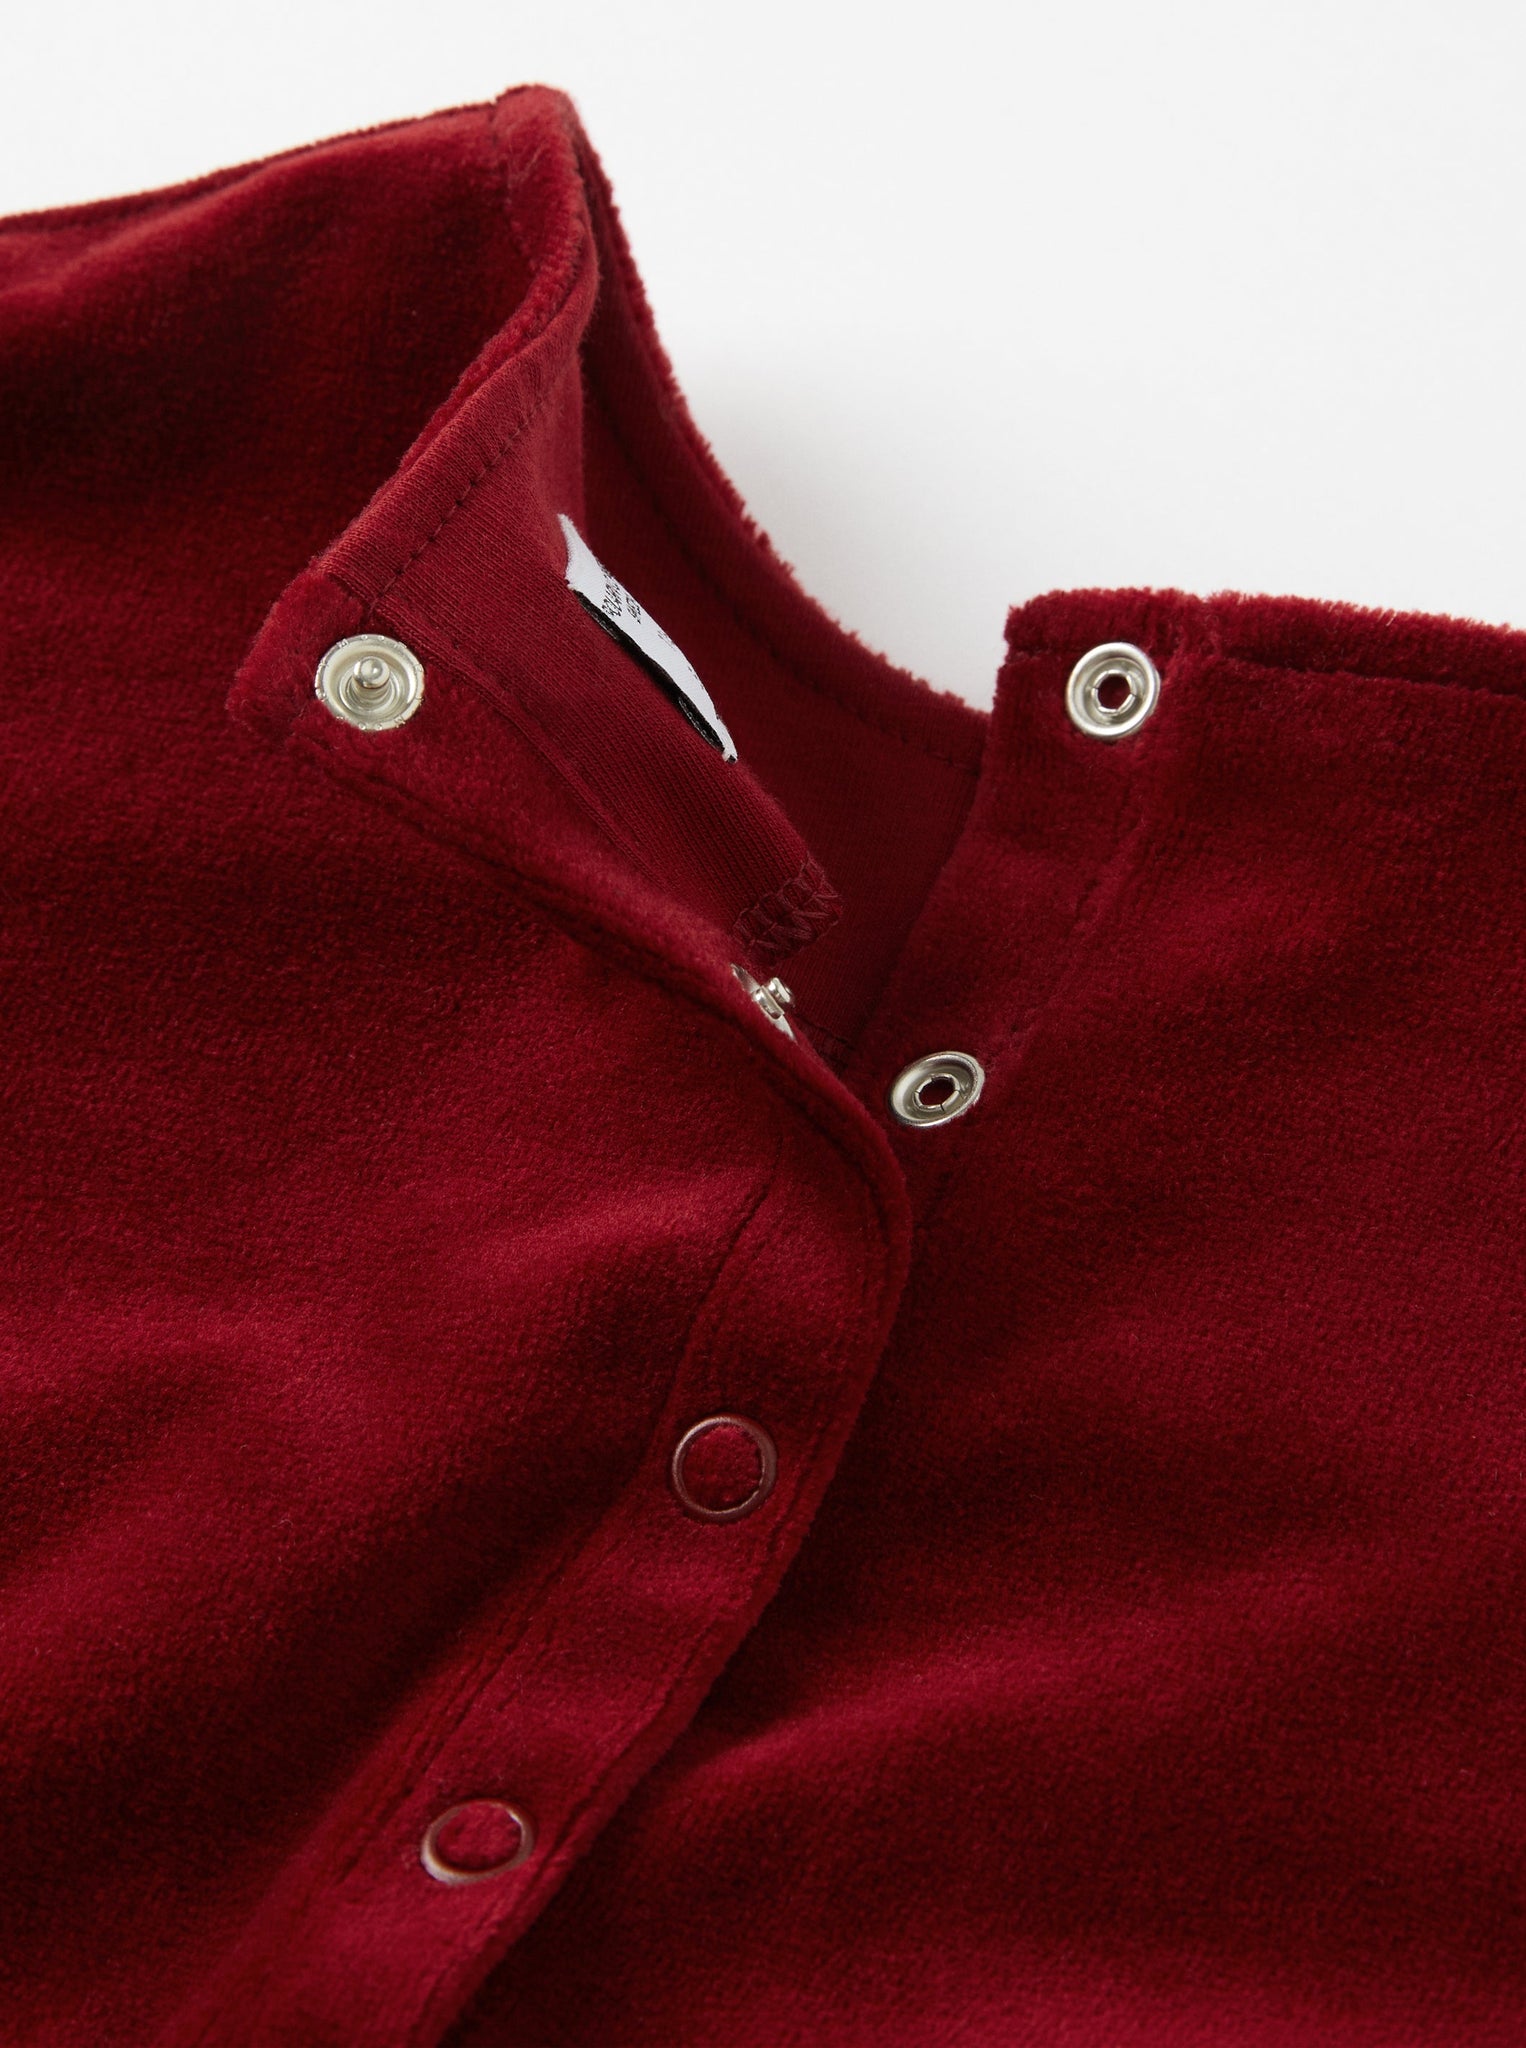 Velour Red Girls Dress from the Polarn O. Pyret kidswear collection. Ethically produced kids clothing.